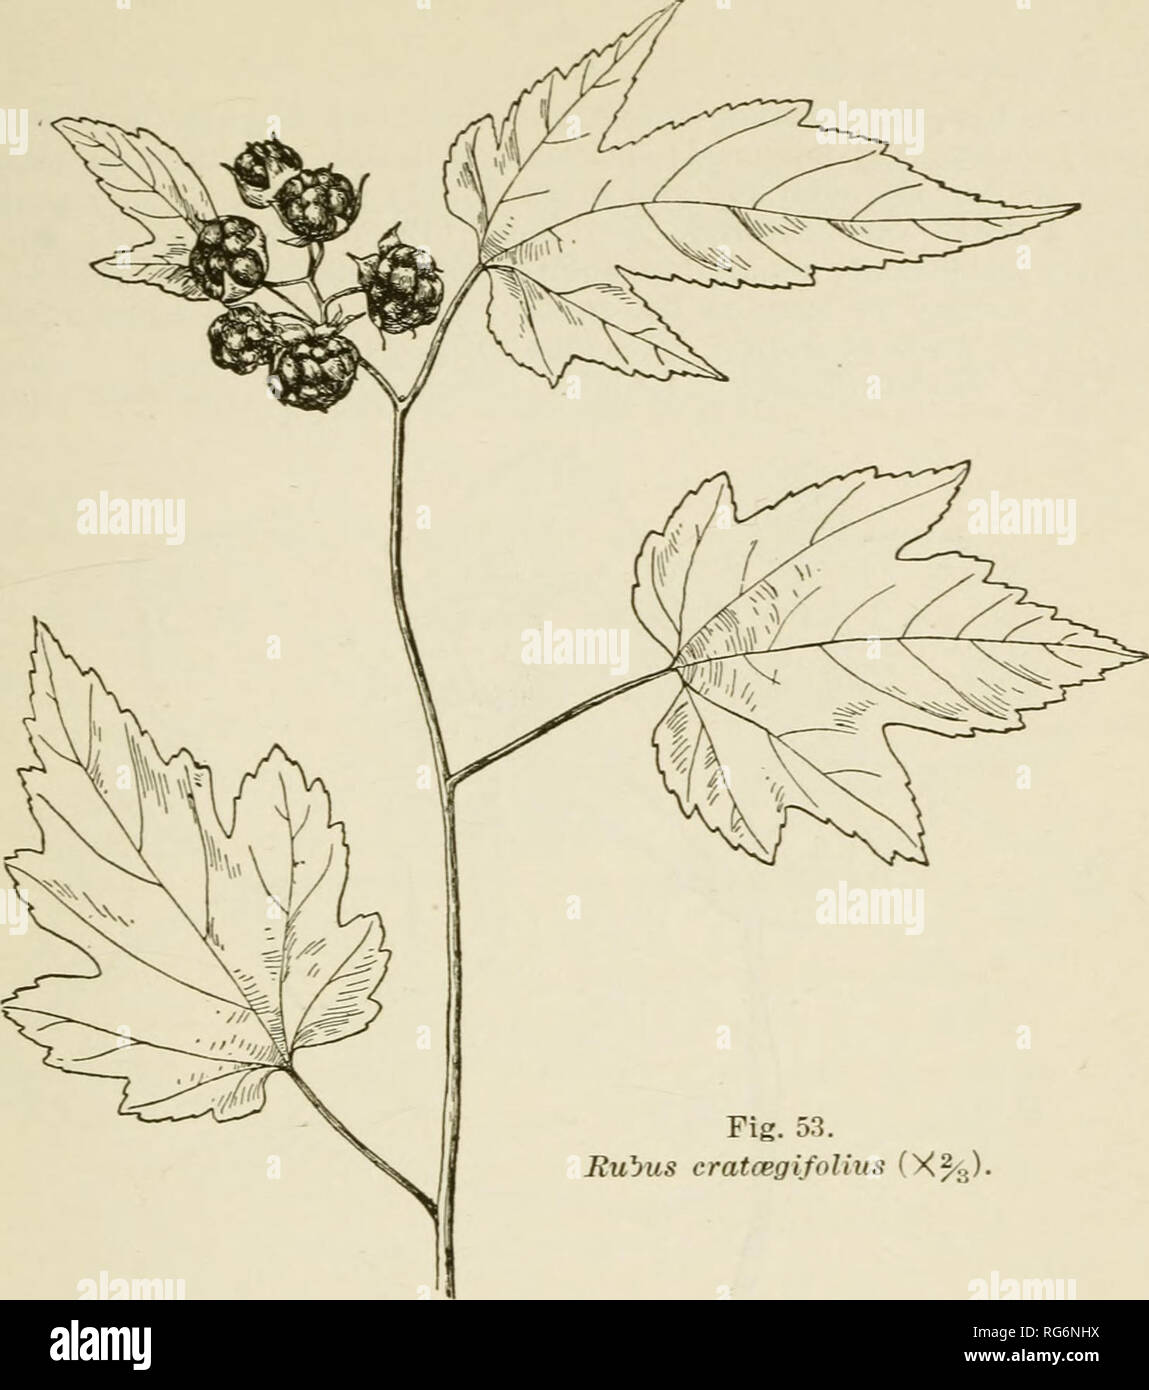 . Bush-fruits; a horticultural monograph of raspberries, blackberries, dewberries, currants, gooseberries, and other shrub-like fruits. Berries. MAYBERBr 311. Fig. 53. Rubus cratcegifolius (X%). 9. R. MICROPHYLLUS, Linn. f. E. jmlmatus, Thunb. Mayberry. Spreading bush, 4 or 5 feet (12-15 decimeters) high, with short stout prickles; leaves small, dark green above, somewhat lighter beneath, silky pubescent on the veins beneath, 3-5-cleft, the lobes very narrow, acuminate, doubly and sharply serrate, central lobe much longer than the lateral ones; flowers three fourths of an inch (20 mm.) broad;  Stock Photo